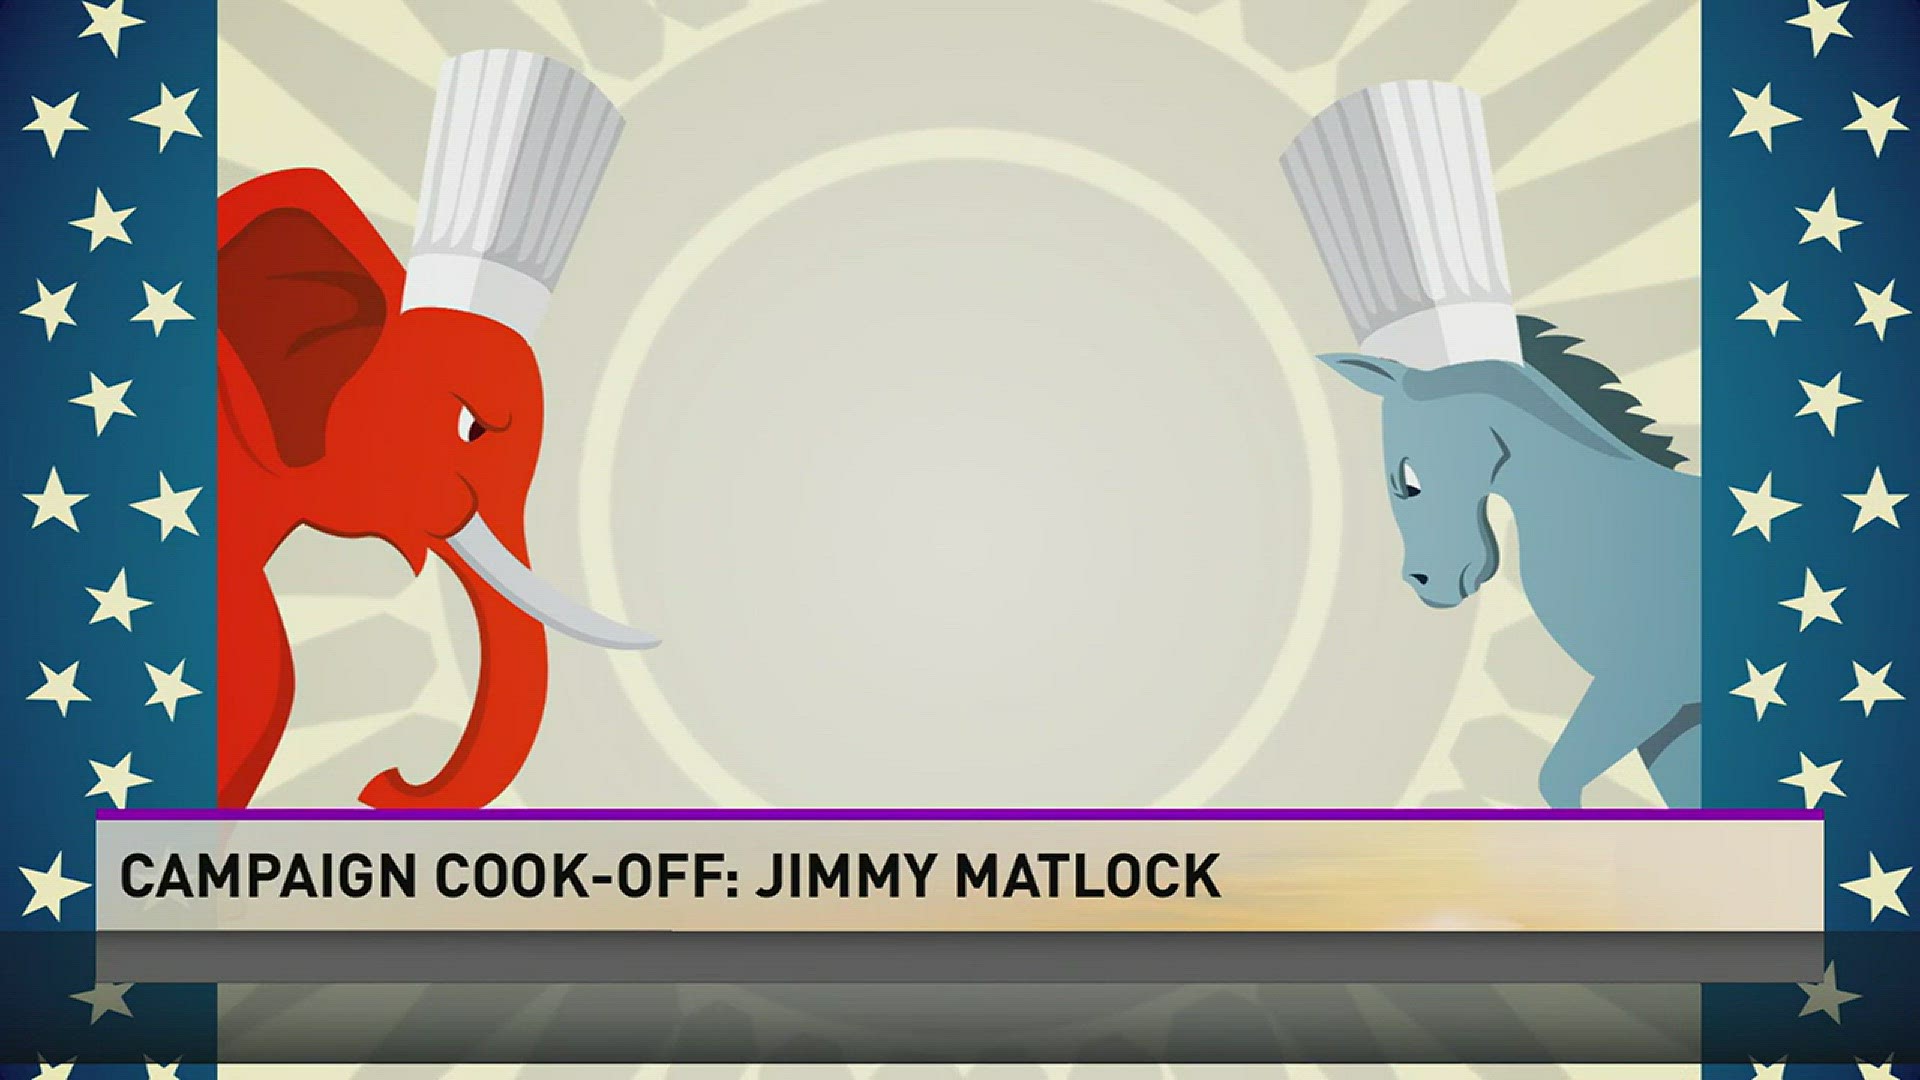 Jimmy Matlock comes on the show to make his family chili recipe and explain why he's running for congress.